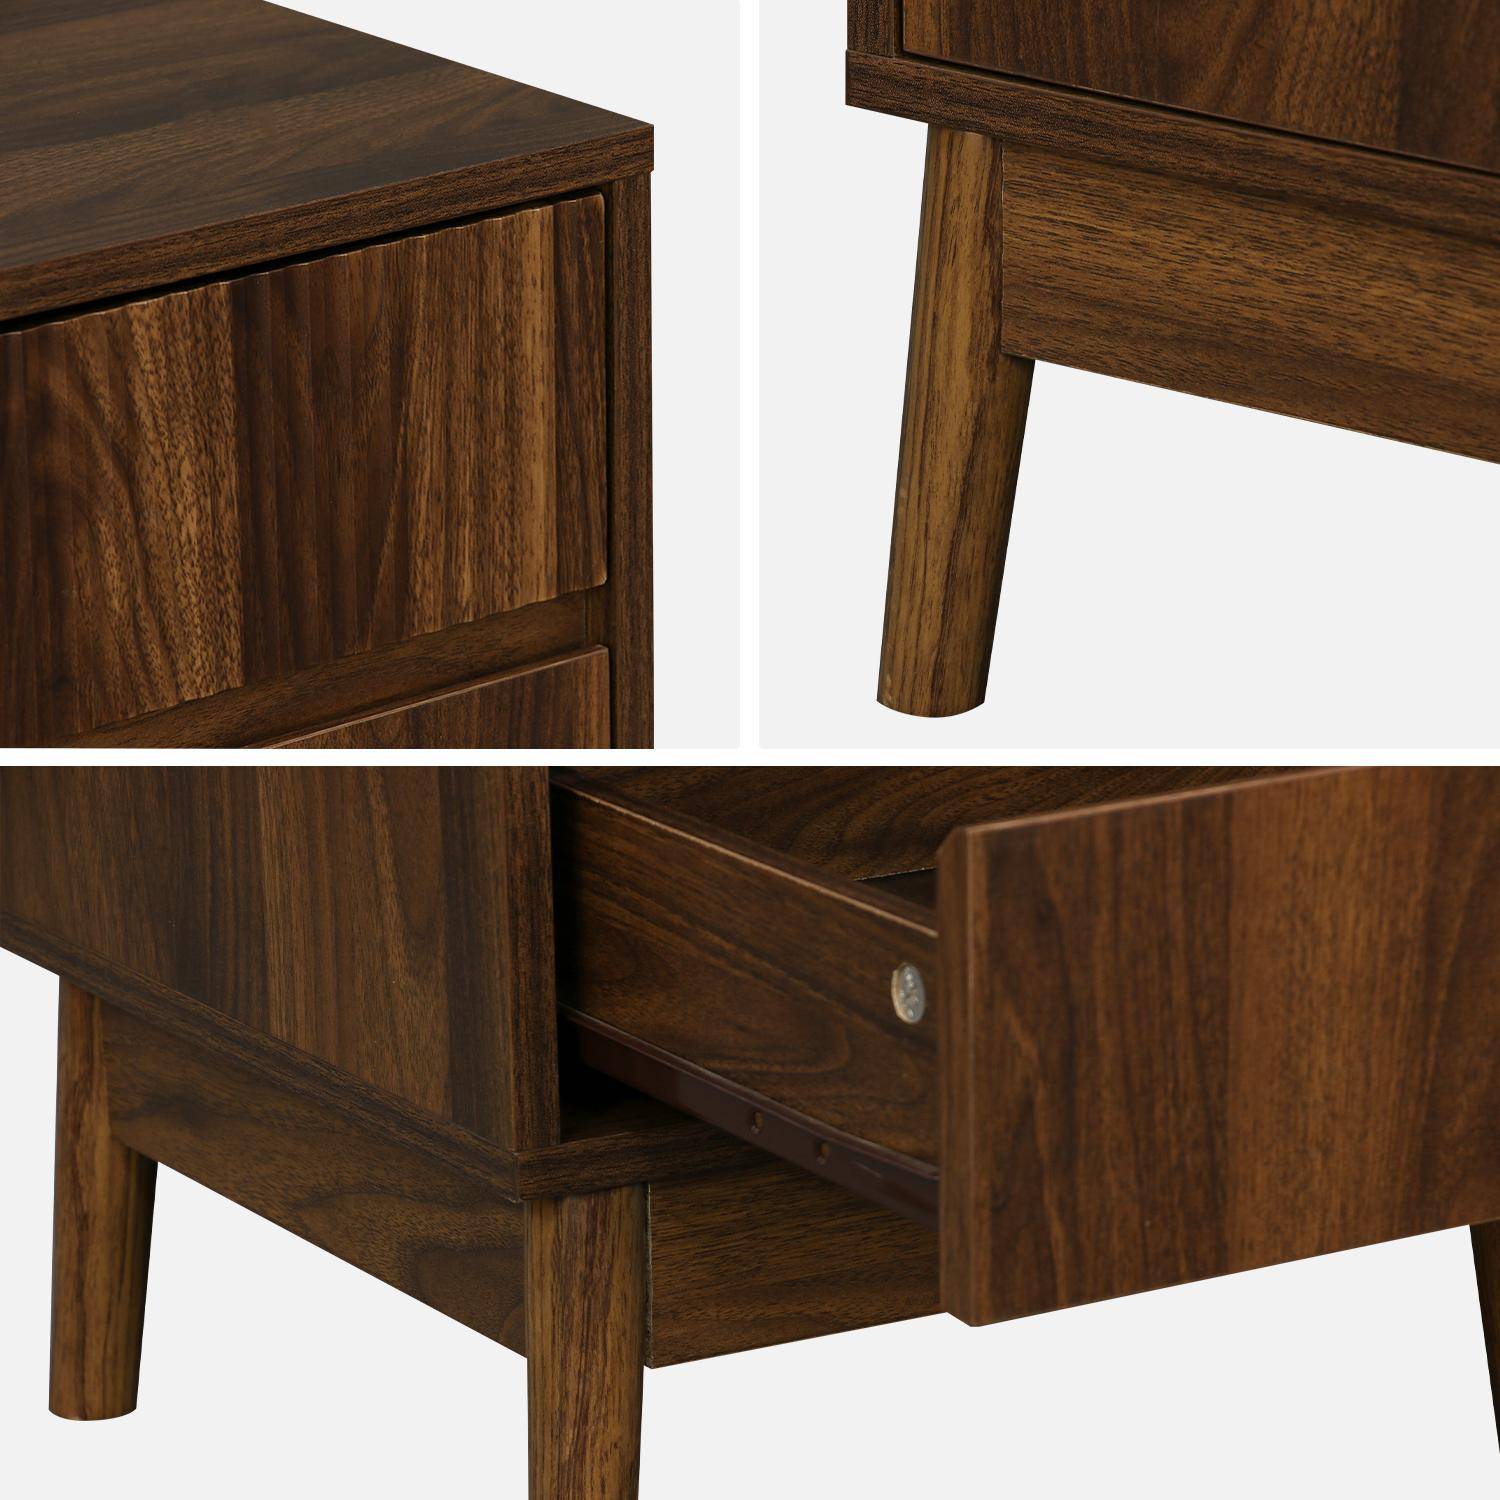 Two-drawer bedside table, walnut decor and pine base - Linear,sweeek,Photo7